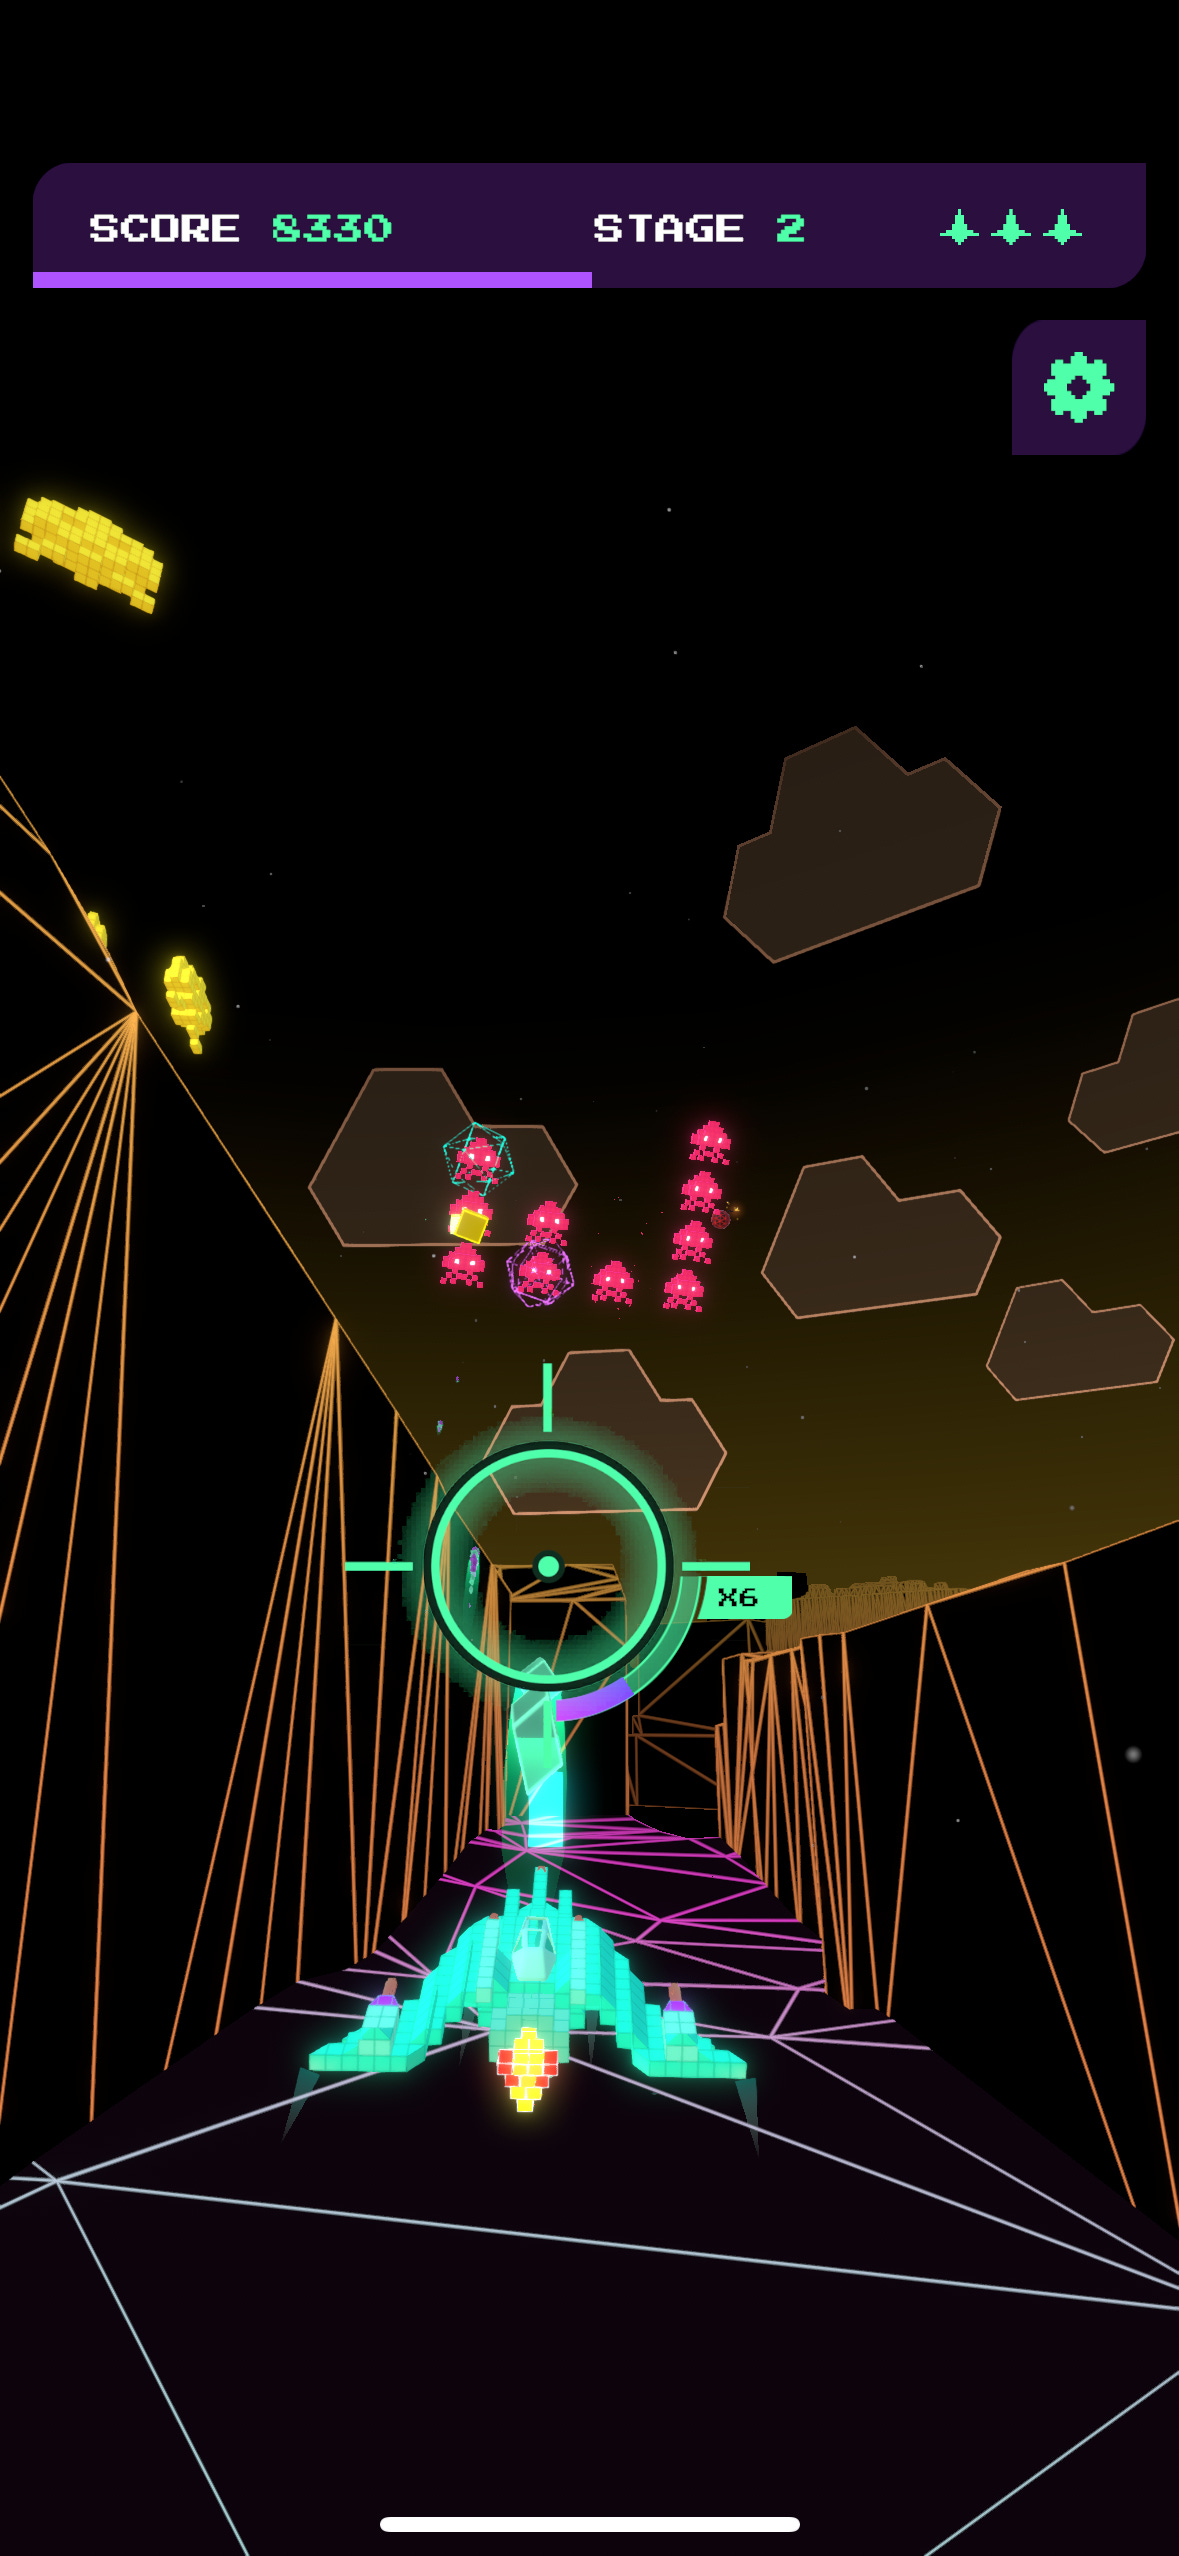 A spaceship flies through a wireframe valley toward some space invaders